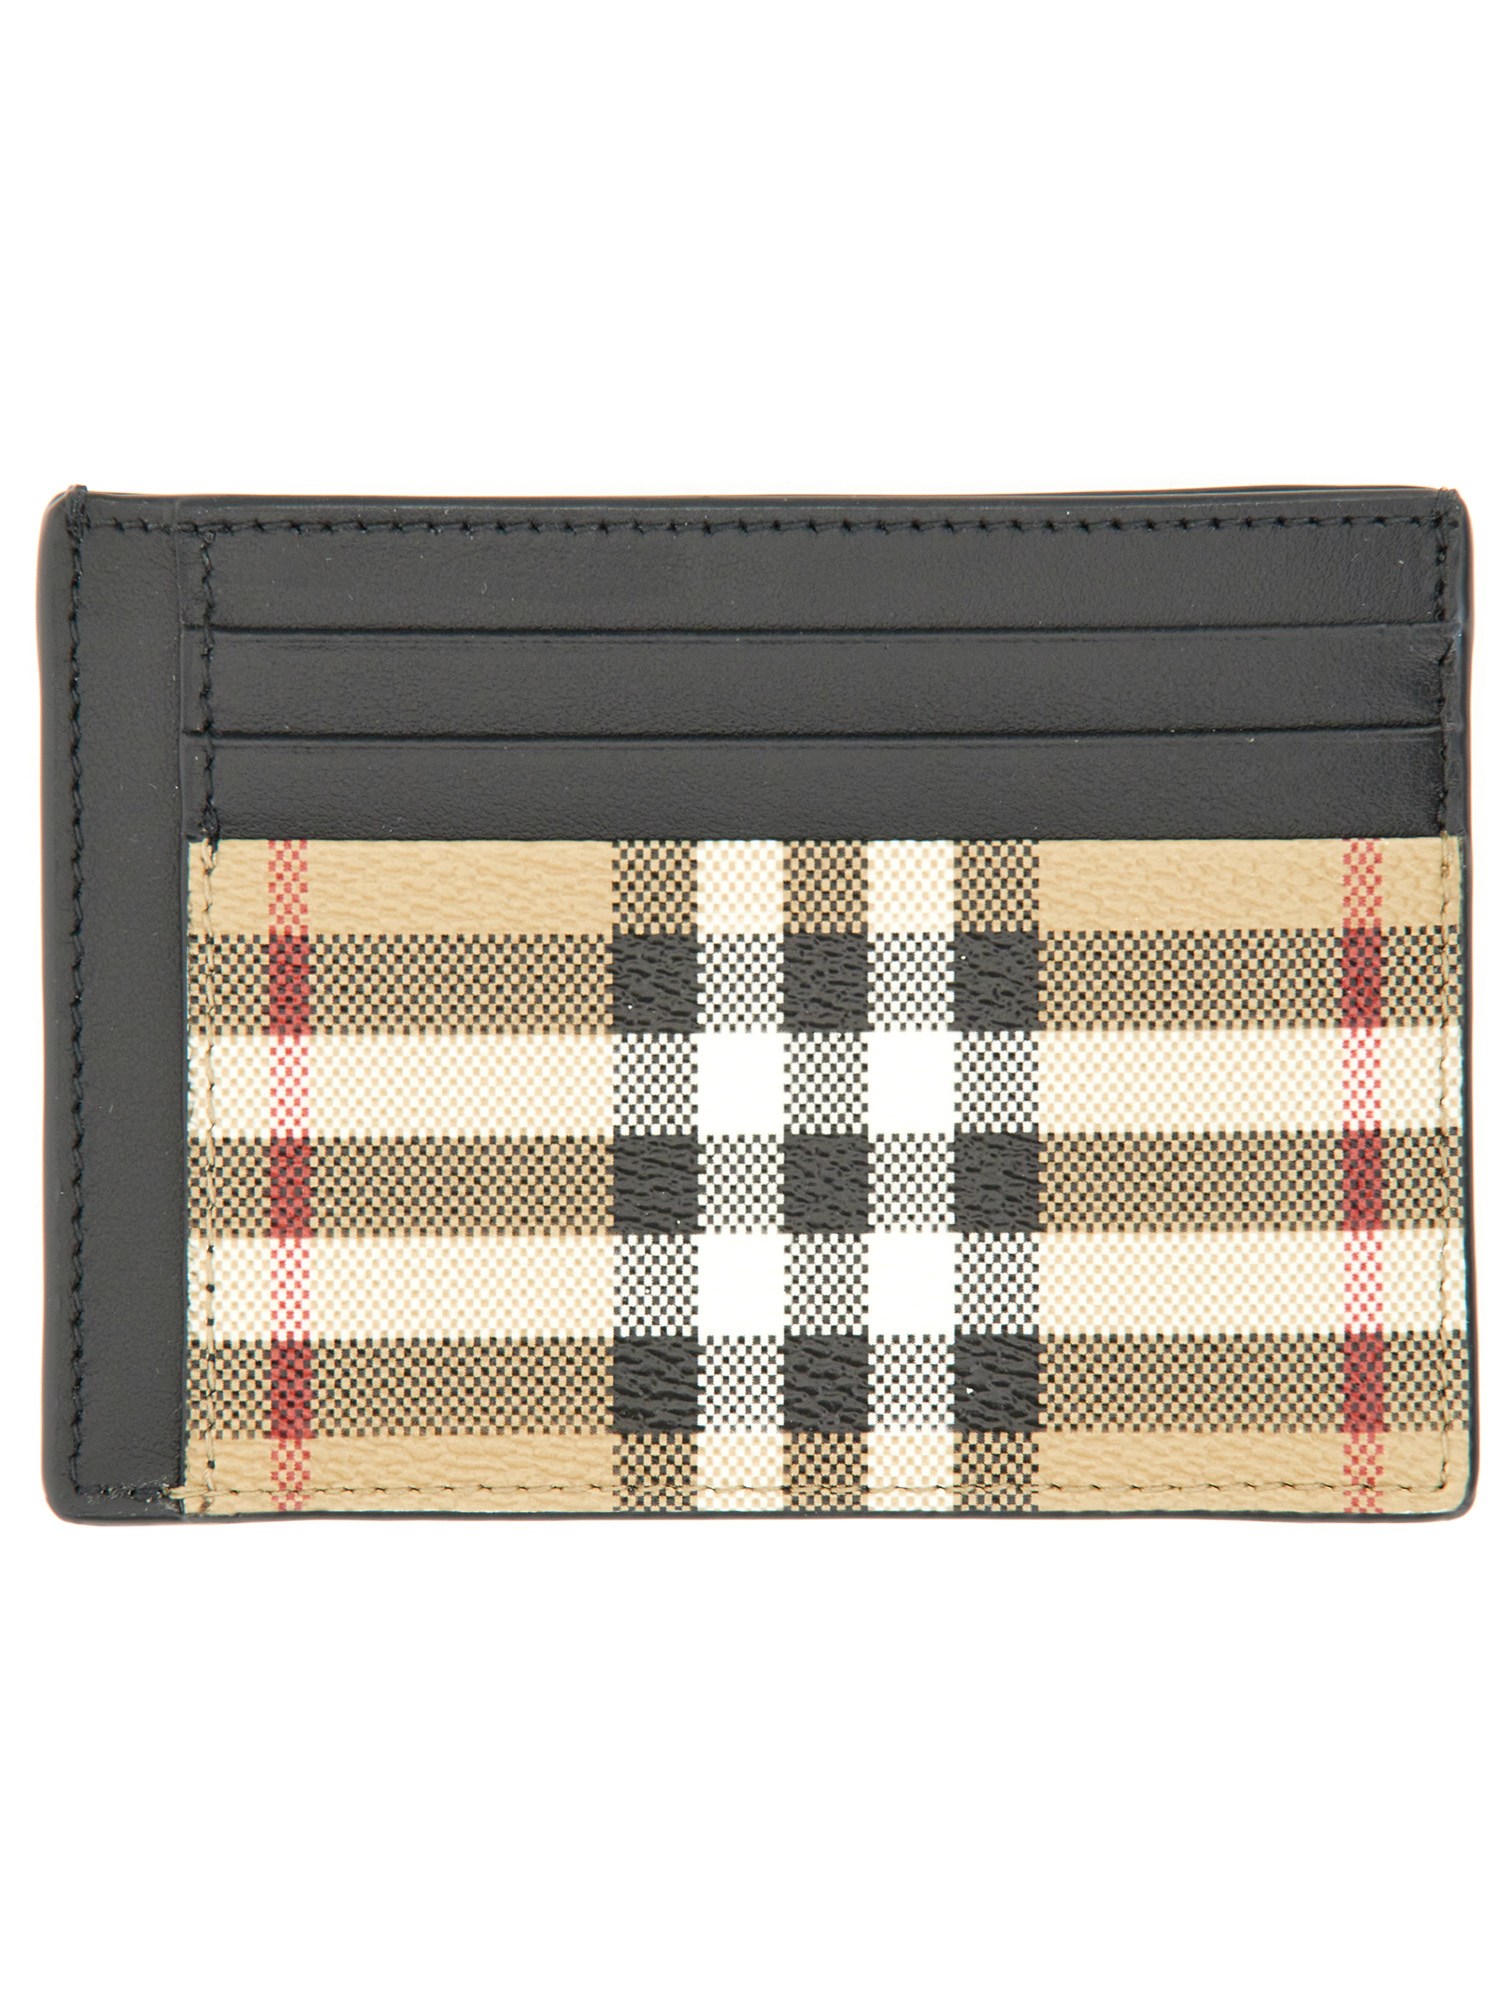 burberry card case with vintage check money clip